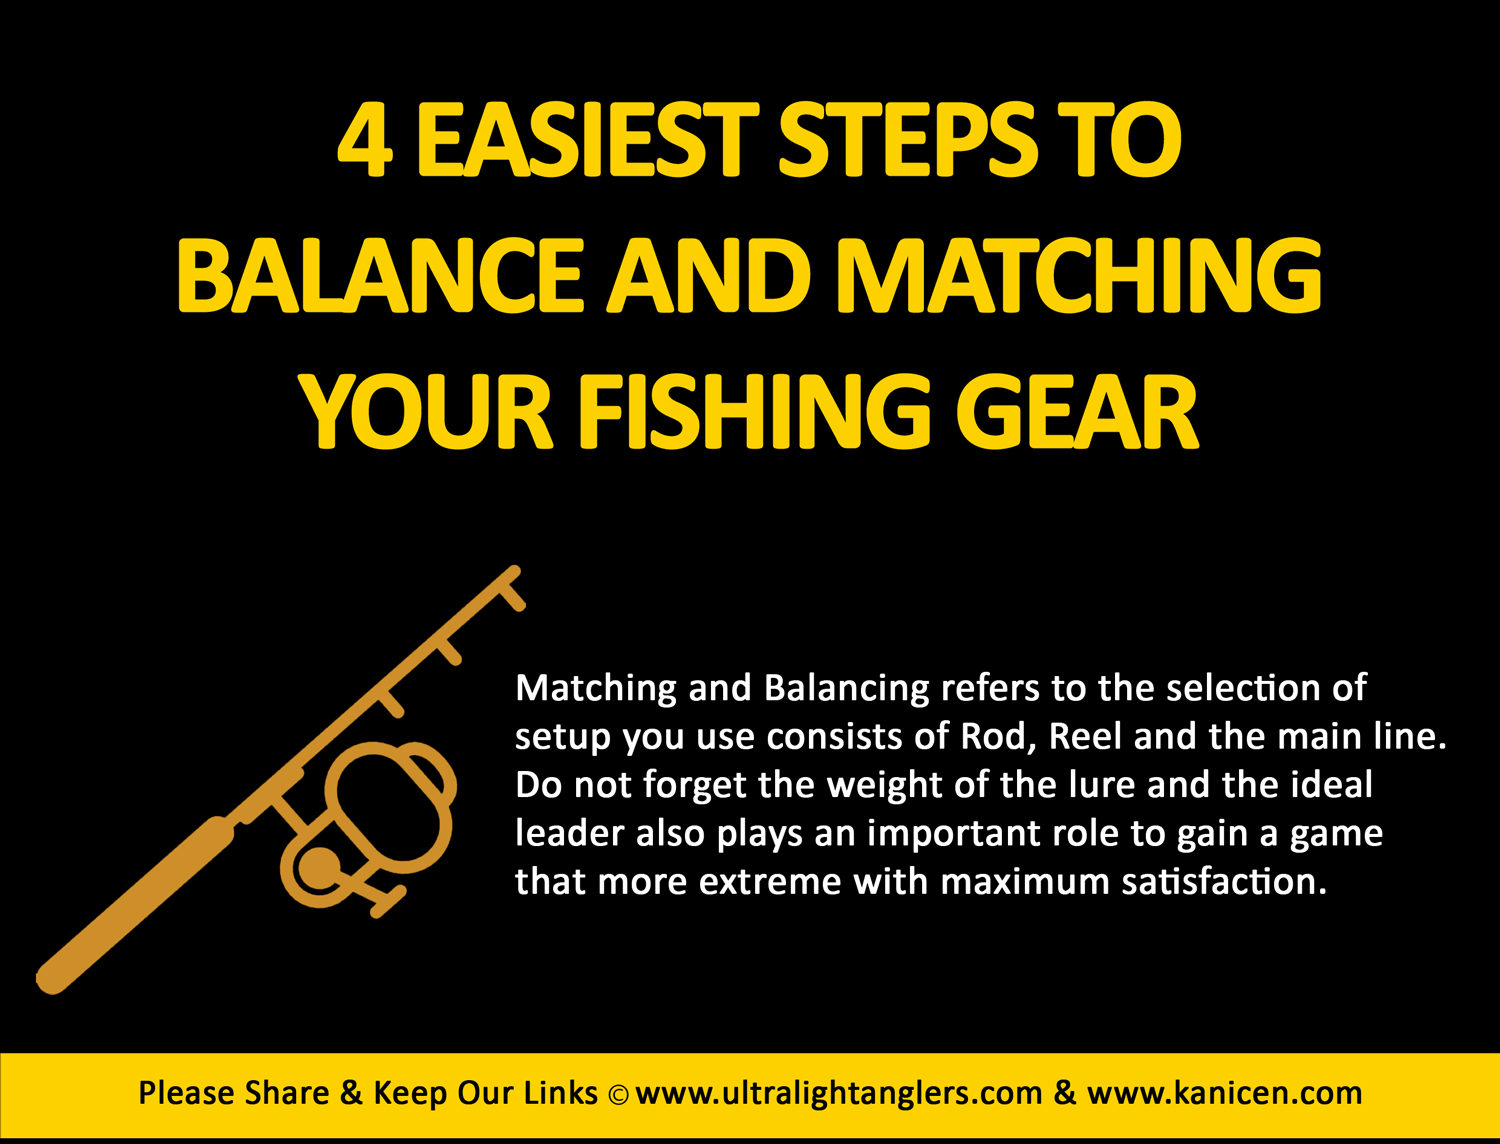 How to Choose Best Fluorocarbon Fishing Leaders On The Market